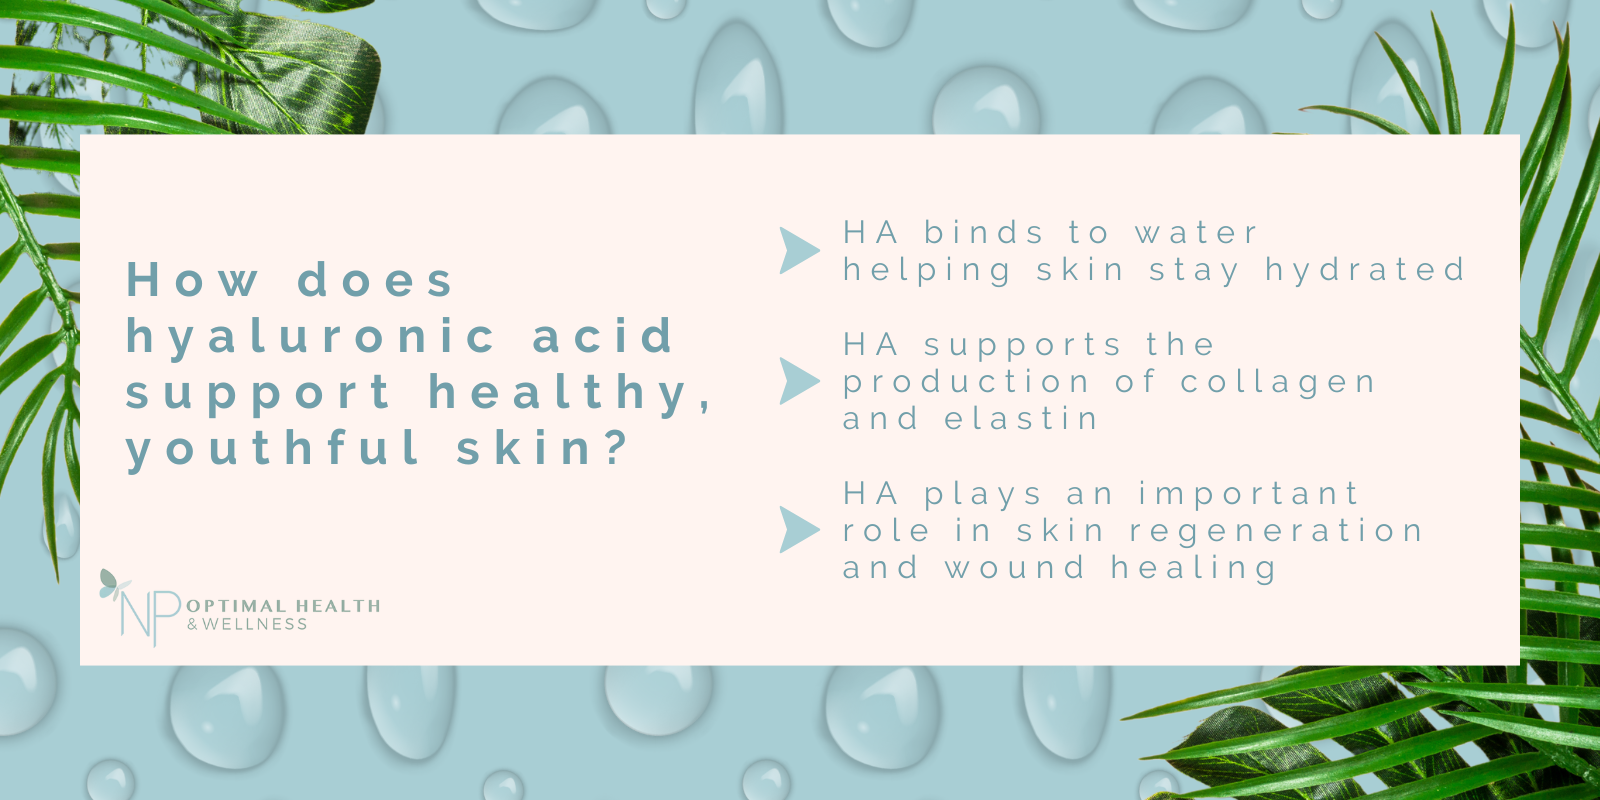 How does hyaluronic acid support healthy, youthful skin